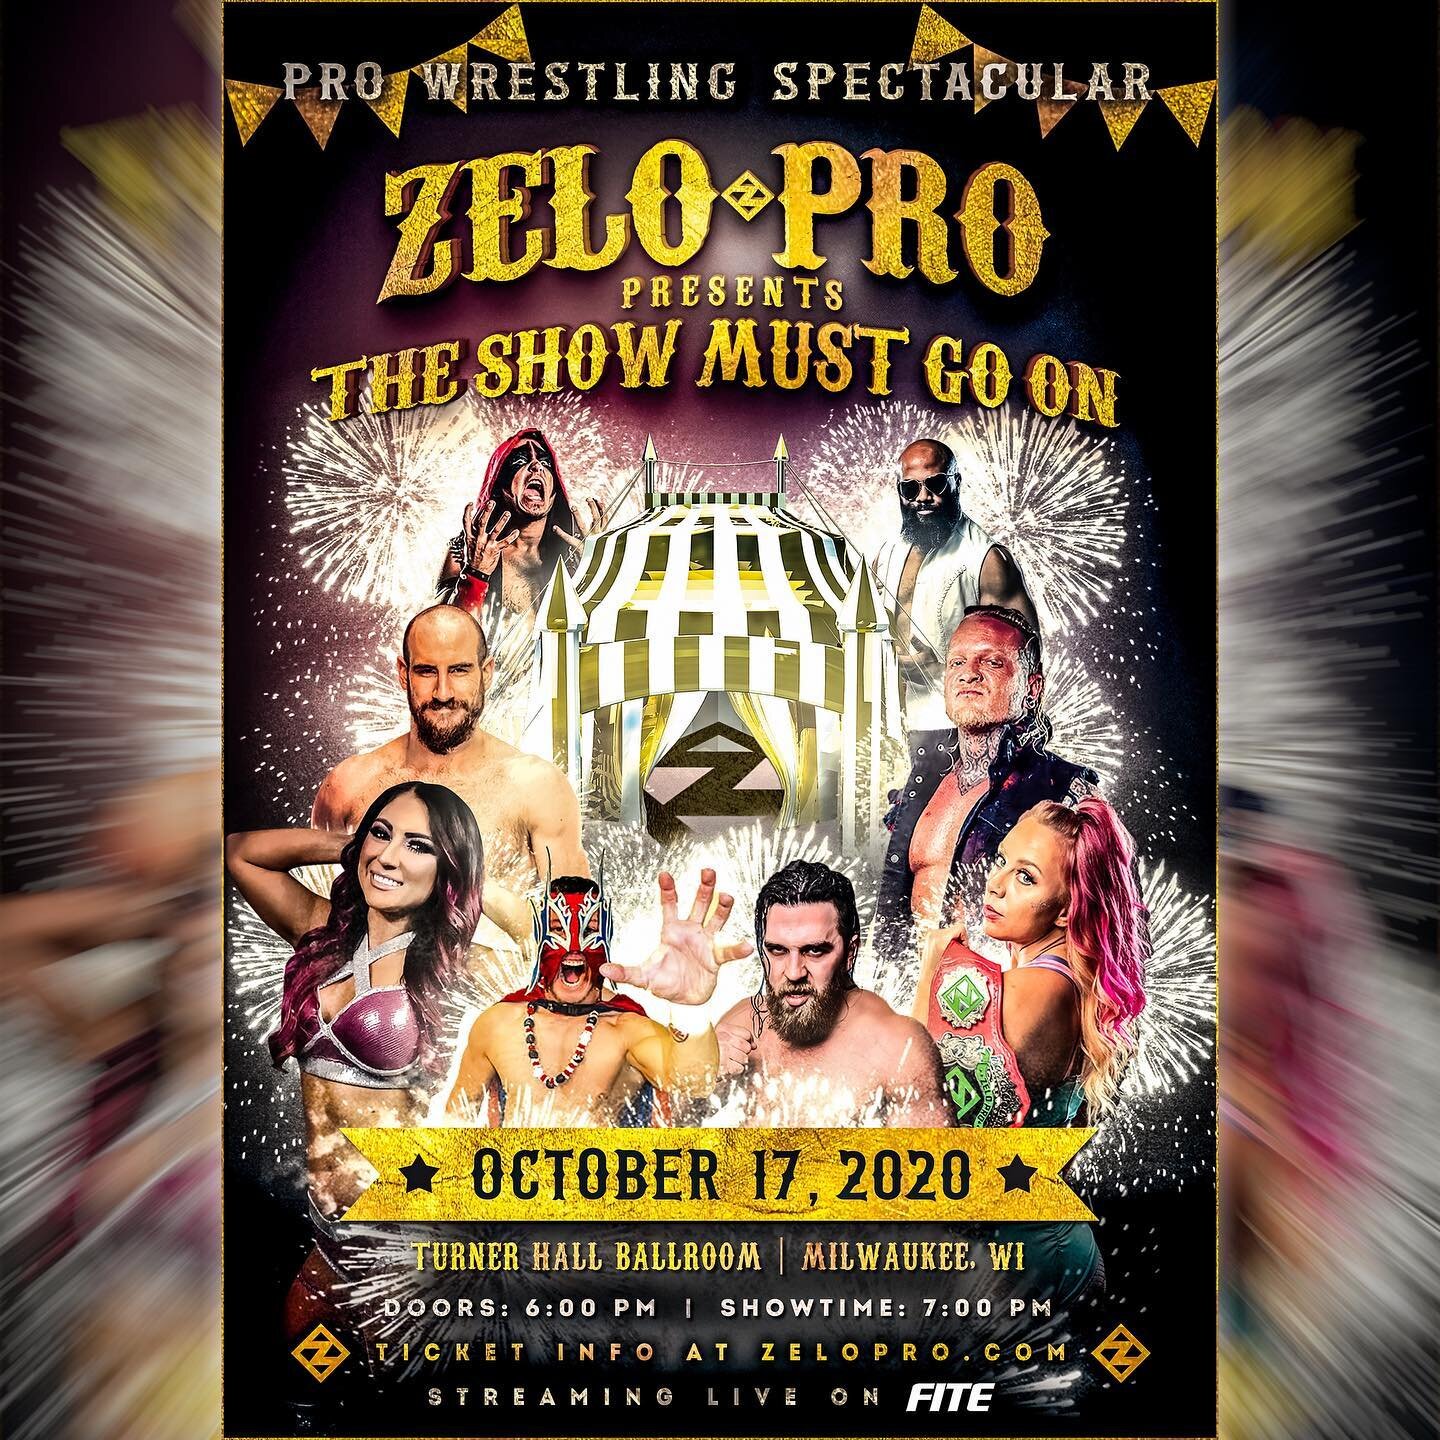 🎪THE SHOW MUST GO ON🎪

Sat. OCT. 17 

Zelo Pro returns to historic Turner Hall Ballroom in Milwaukee, WI!

Tickets are on-sale now!

https://www.axs.com/events/396482/zelo-pro-wrestling-tickets?skin=pabst